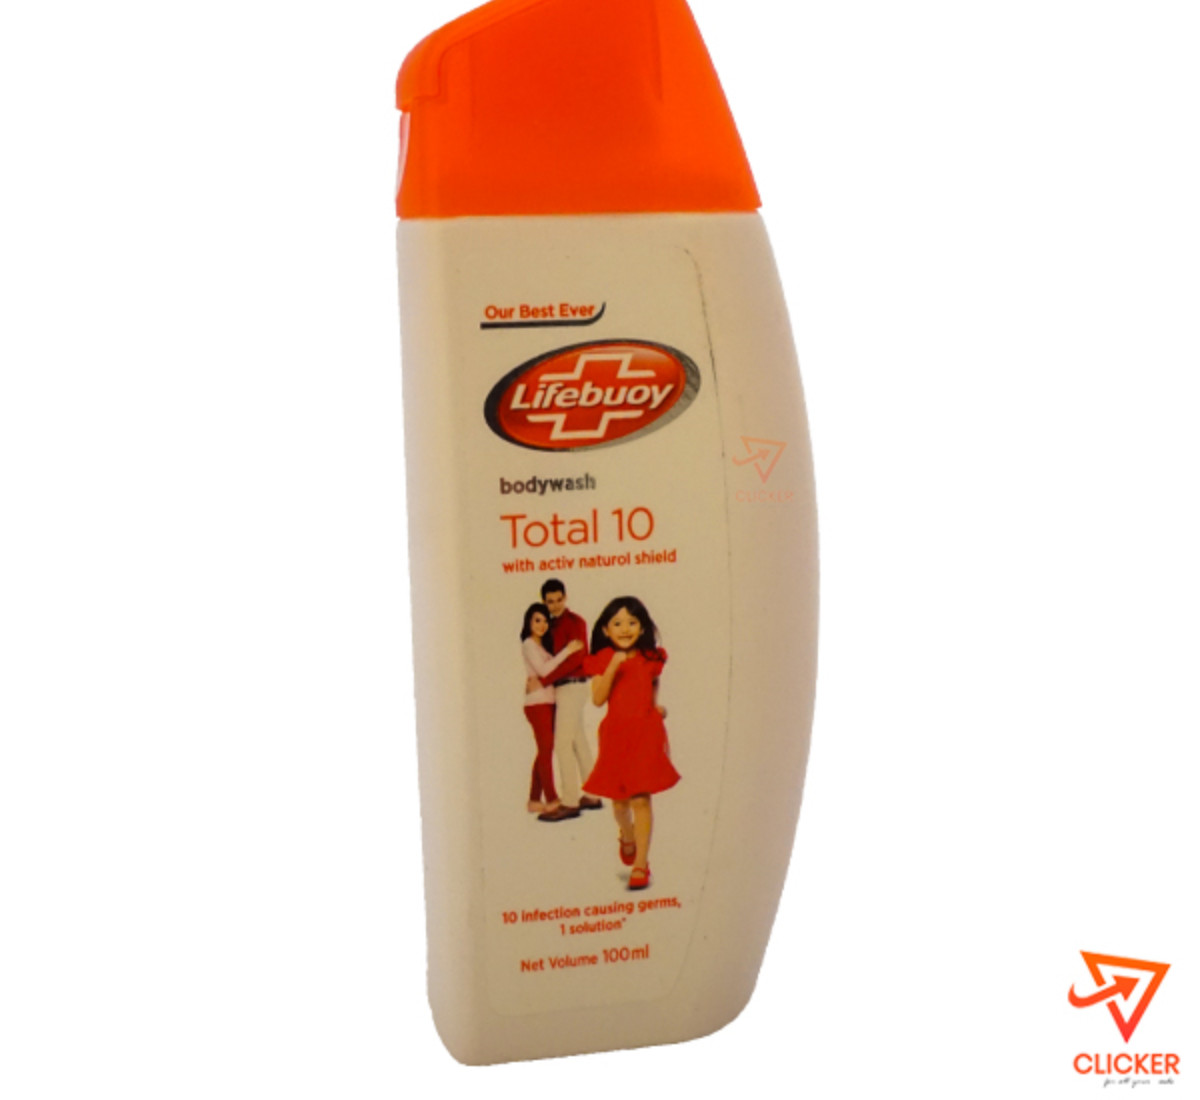 Clicker product 100ml LIFEBUOY total 10 with active natural shield 1044